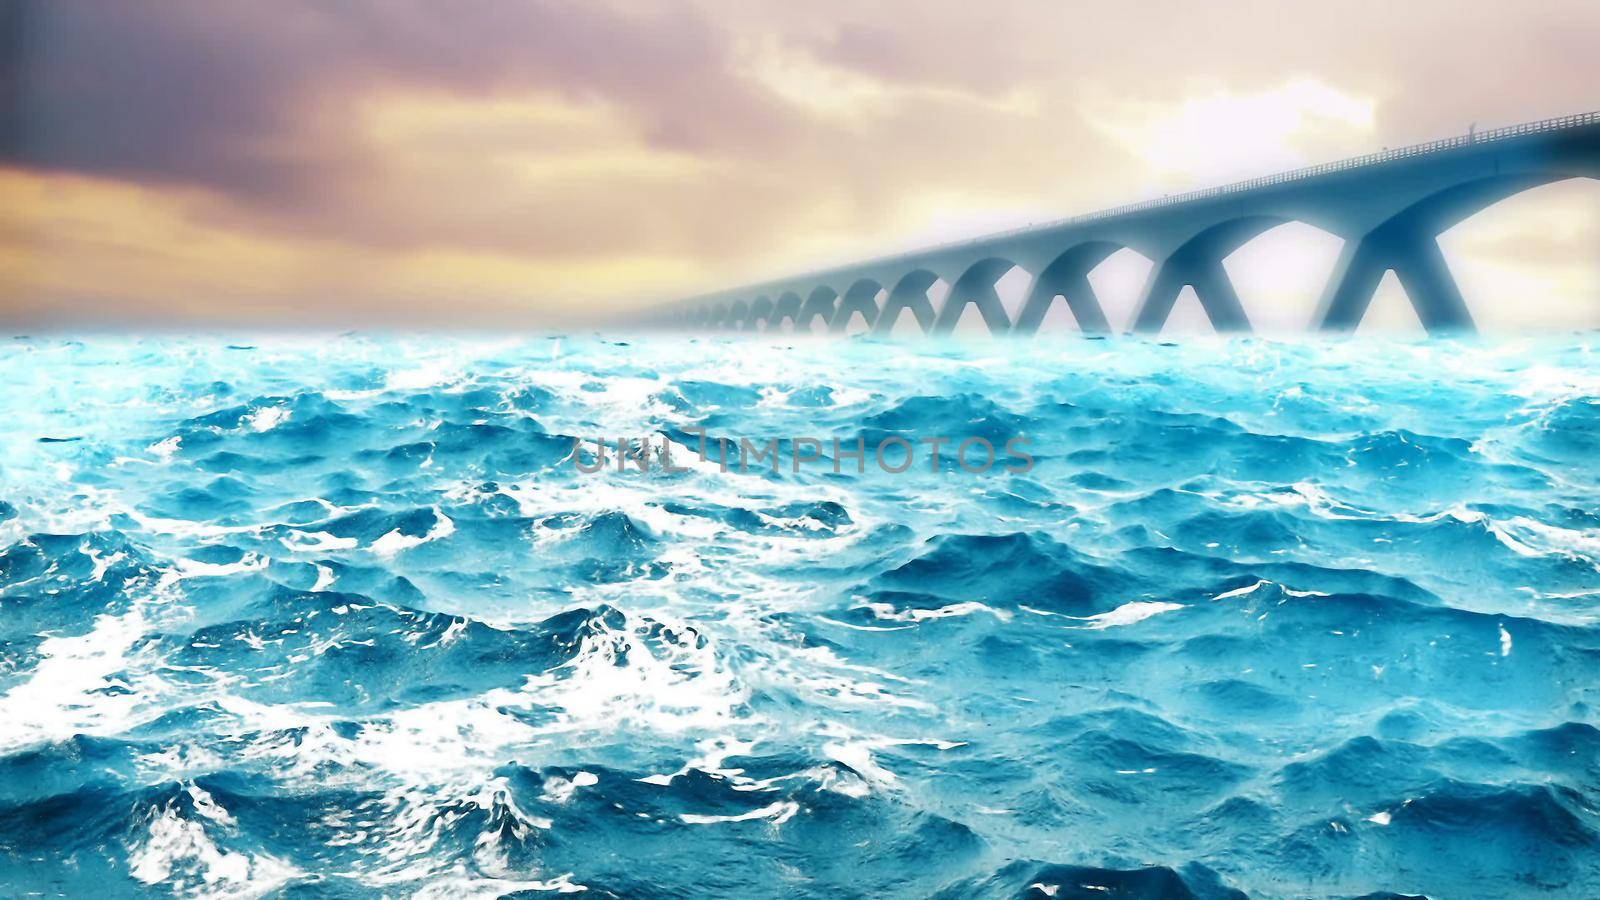 ocean waves with bridge on the background. 3D rendering by designprojects